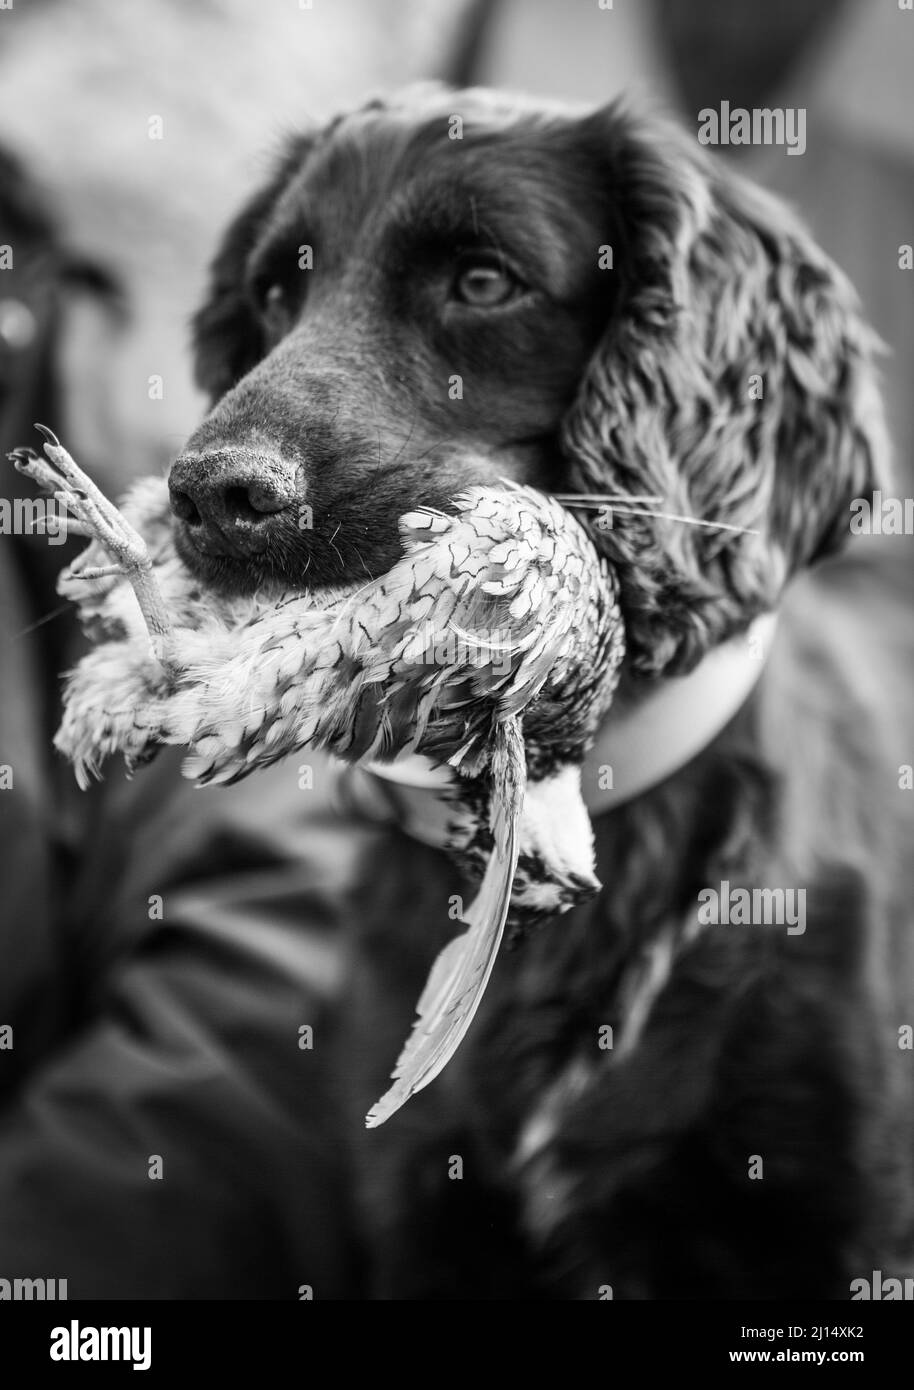 Grayscale shot of a spaniel dog with a bird on his mouth Stock Photo